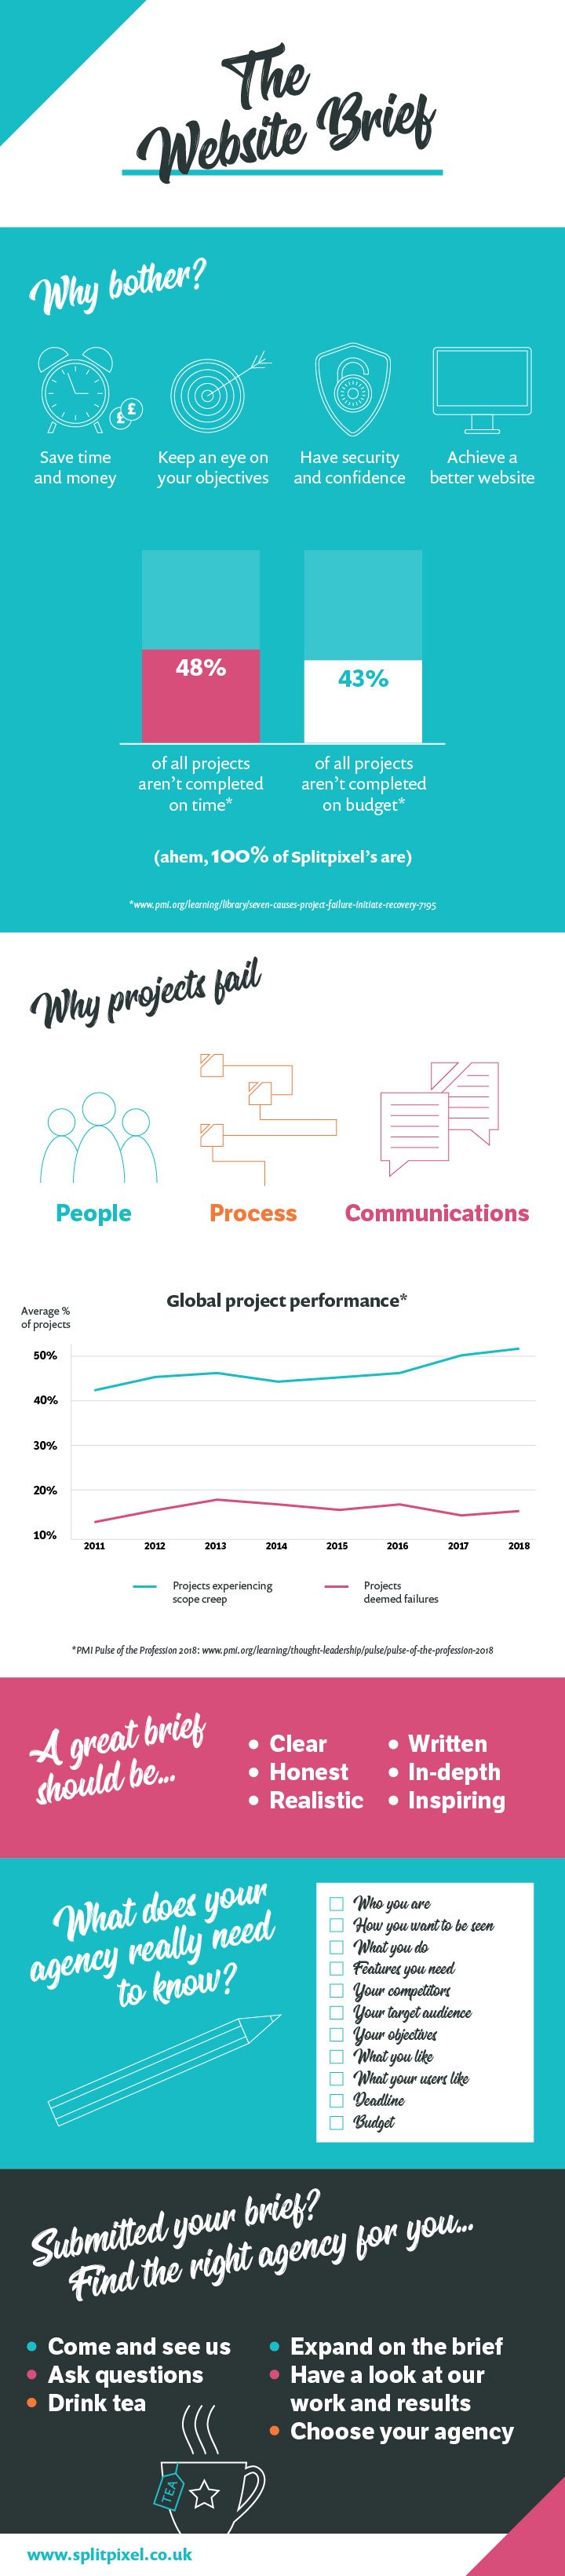 An infographic about the website brief - why bother, why projects fail, what a great brief should be, what your agency needs to know and next steps.